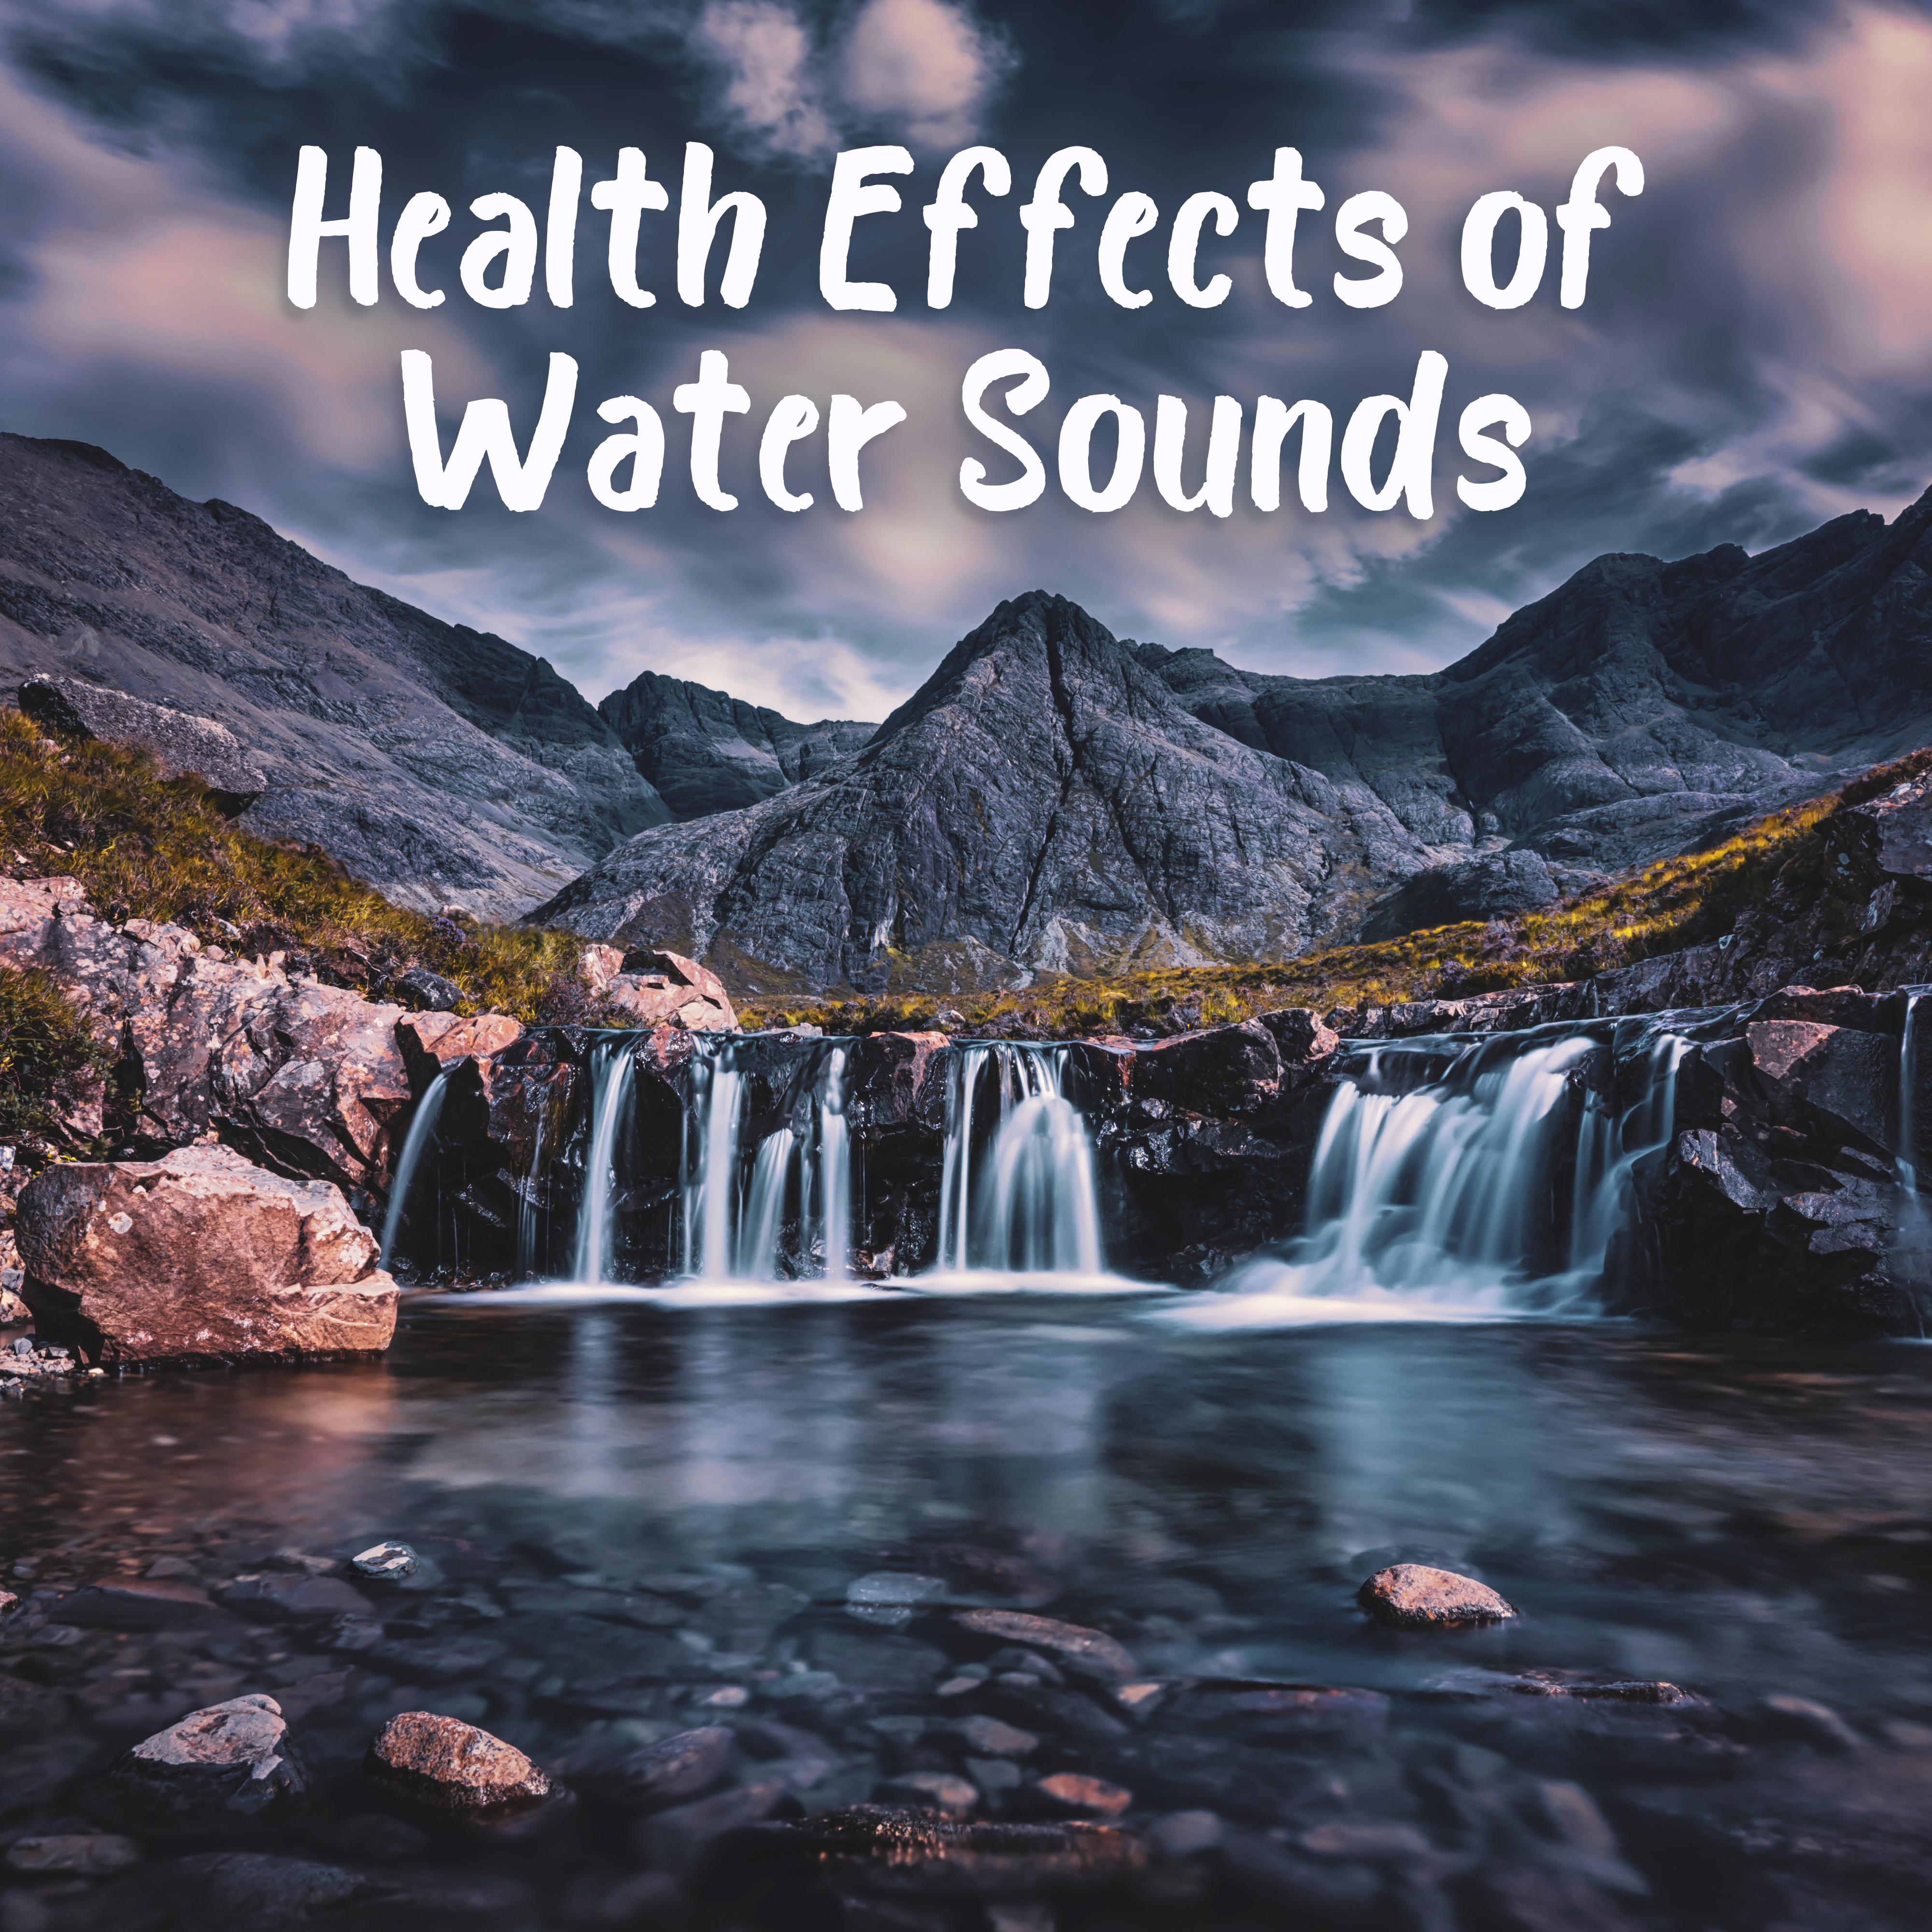 Health Effects of Water Sounds: 15 New Age Songs with Water Noises for Total Relaxation & Deep Meditation, Peaceful Music to Rest & Calming Down